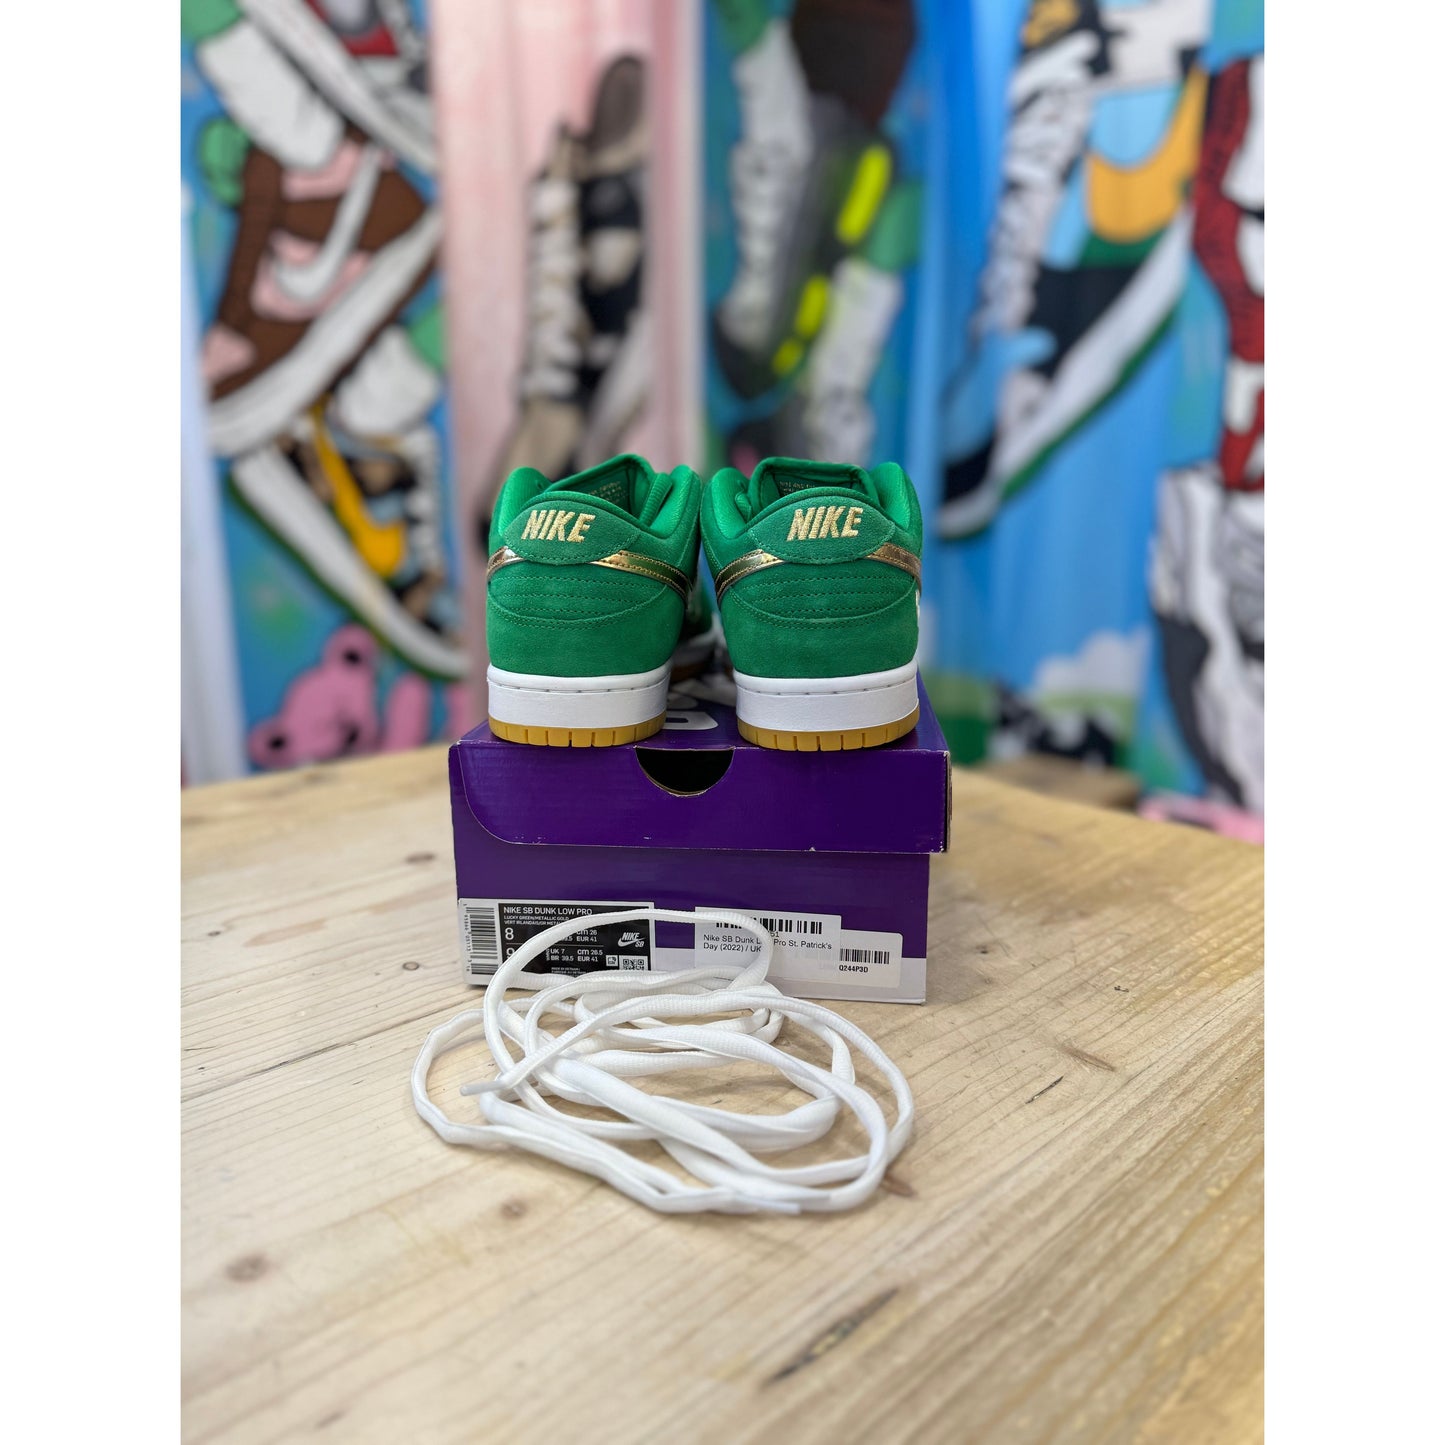 Nike SB Dunk Low St. Patricks's Day UK 7 by Nike from £150.00